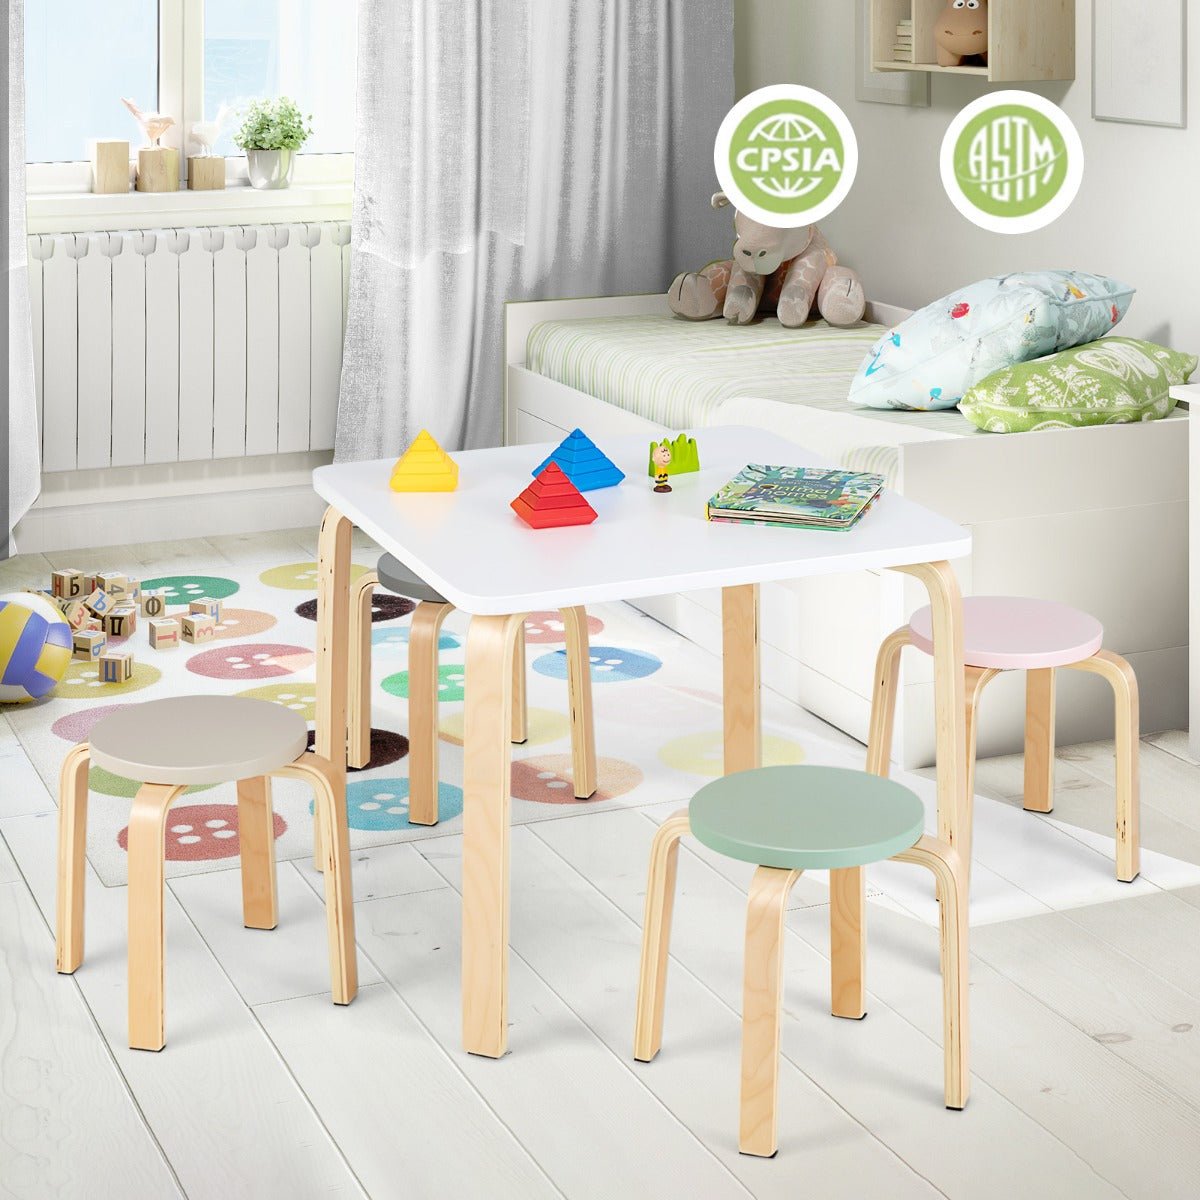 Macaroon Children's Table & Chair Set: 5-Piece Furniture Collection for Kids